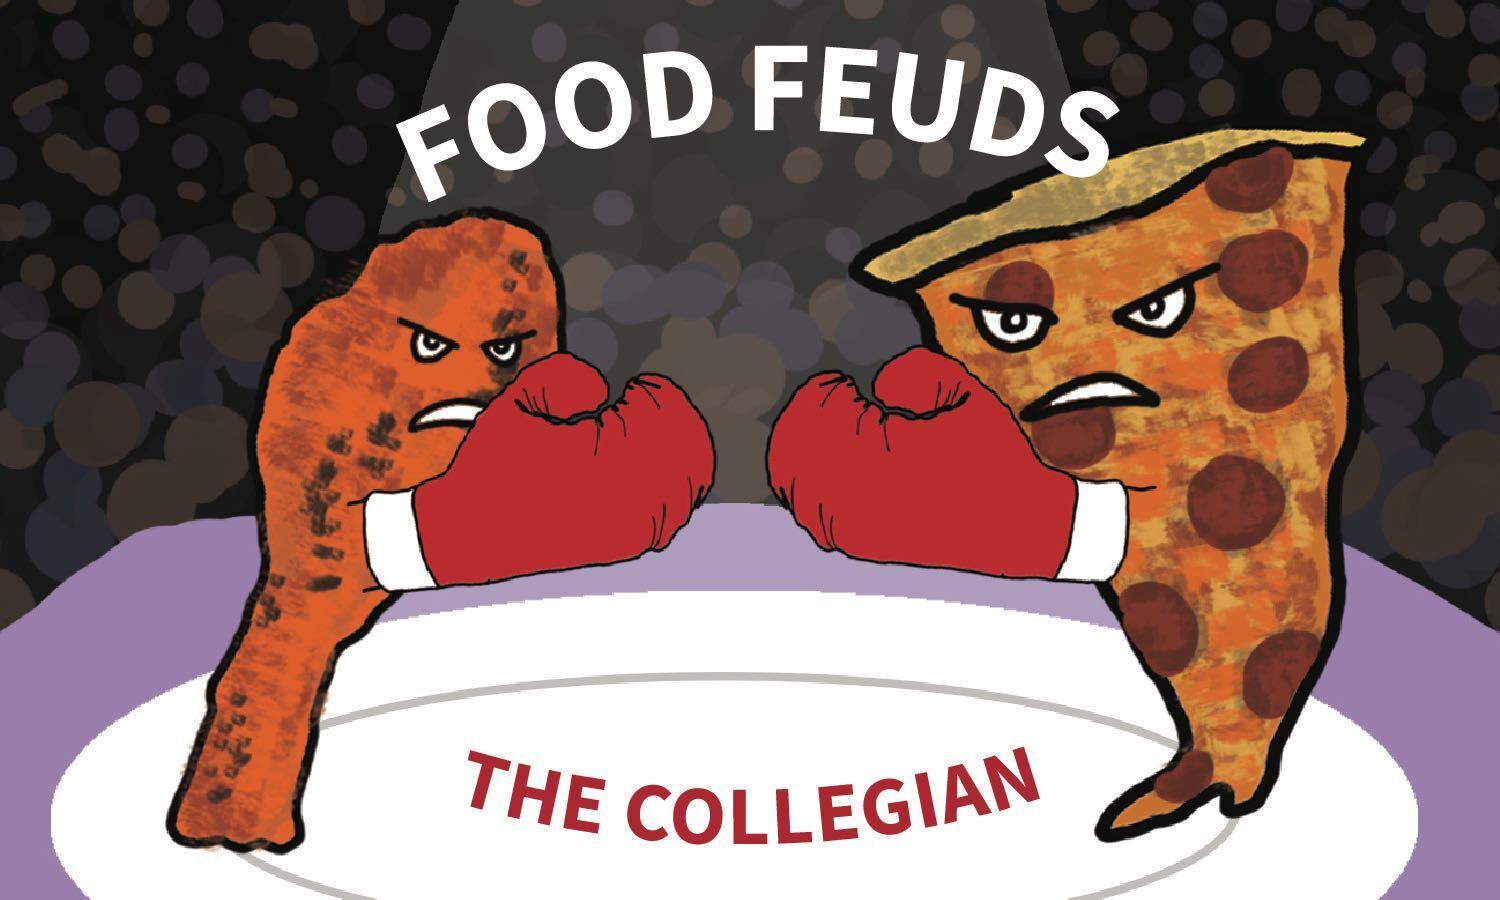 graphic illustration of a chicken drumstick and a slice of pizza in a boxing match on a plate with the words Food Feuds titled above